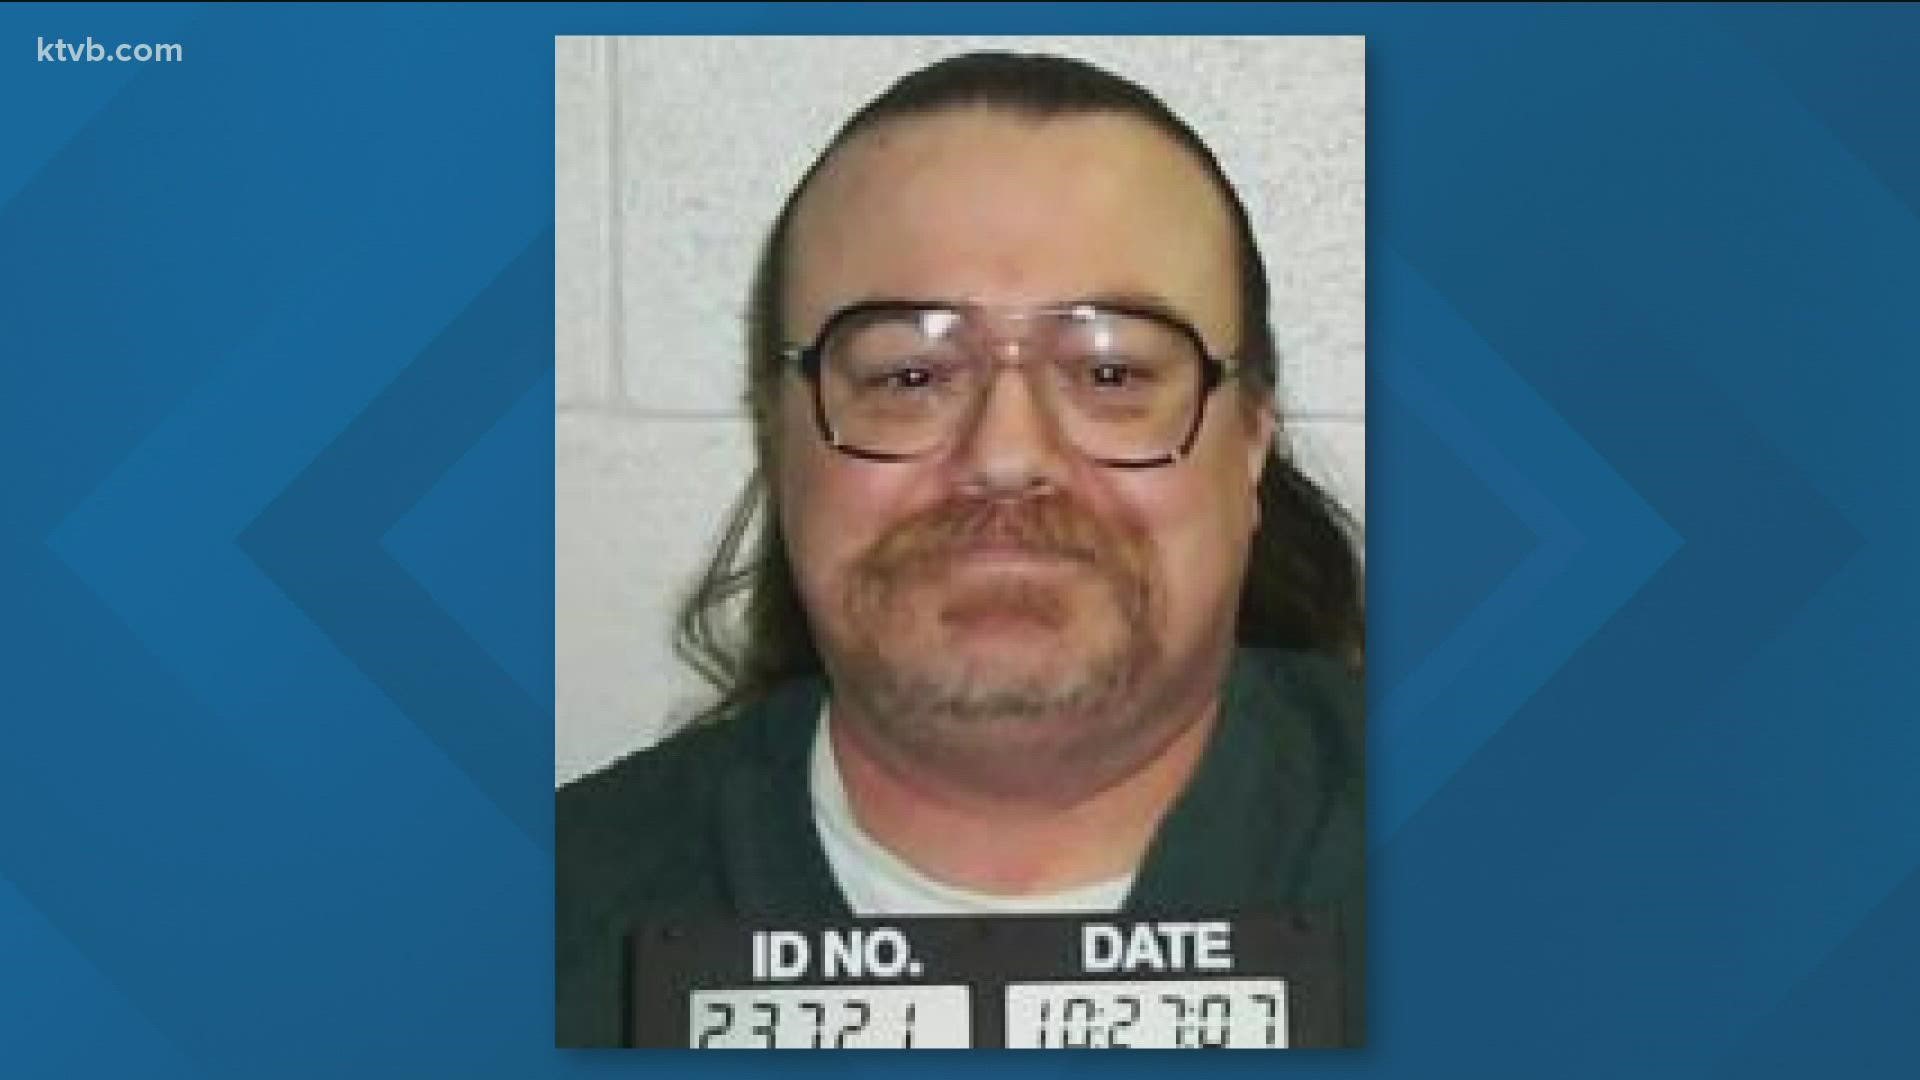 The Idaho Probation and Parole Board voted 4-3 in favor of commuting Pizzuto's death sentence, but Gov. Brad Little disagreed and denied the request.